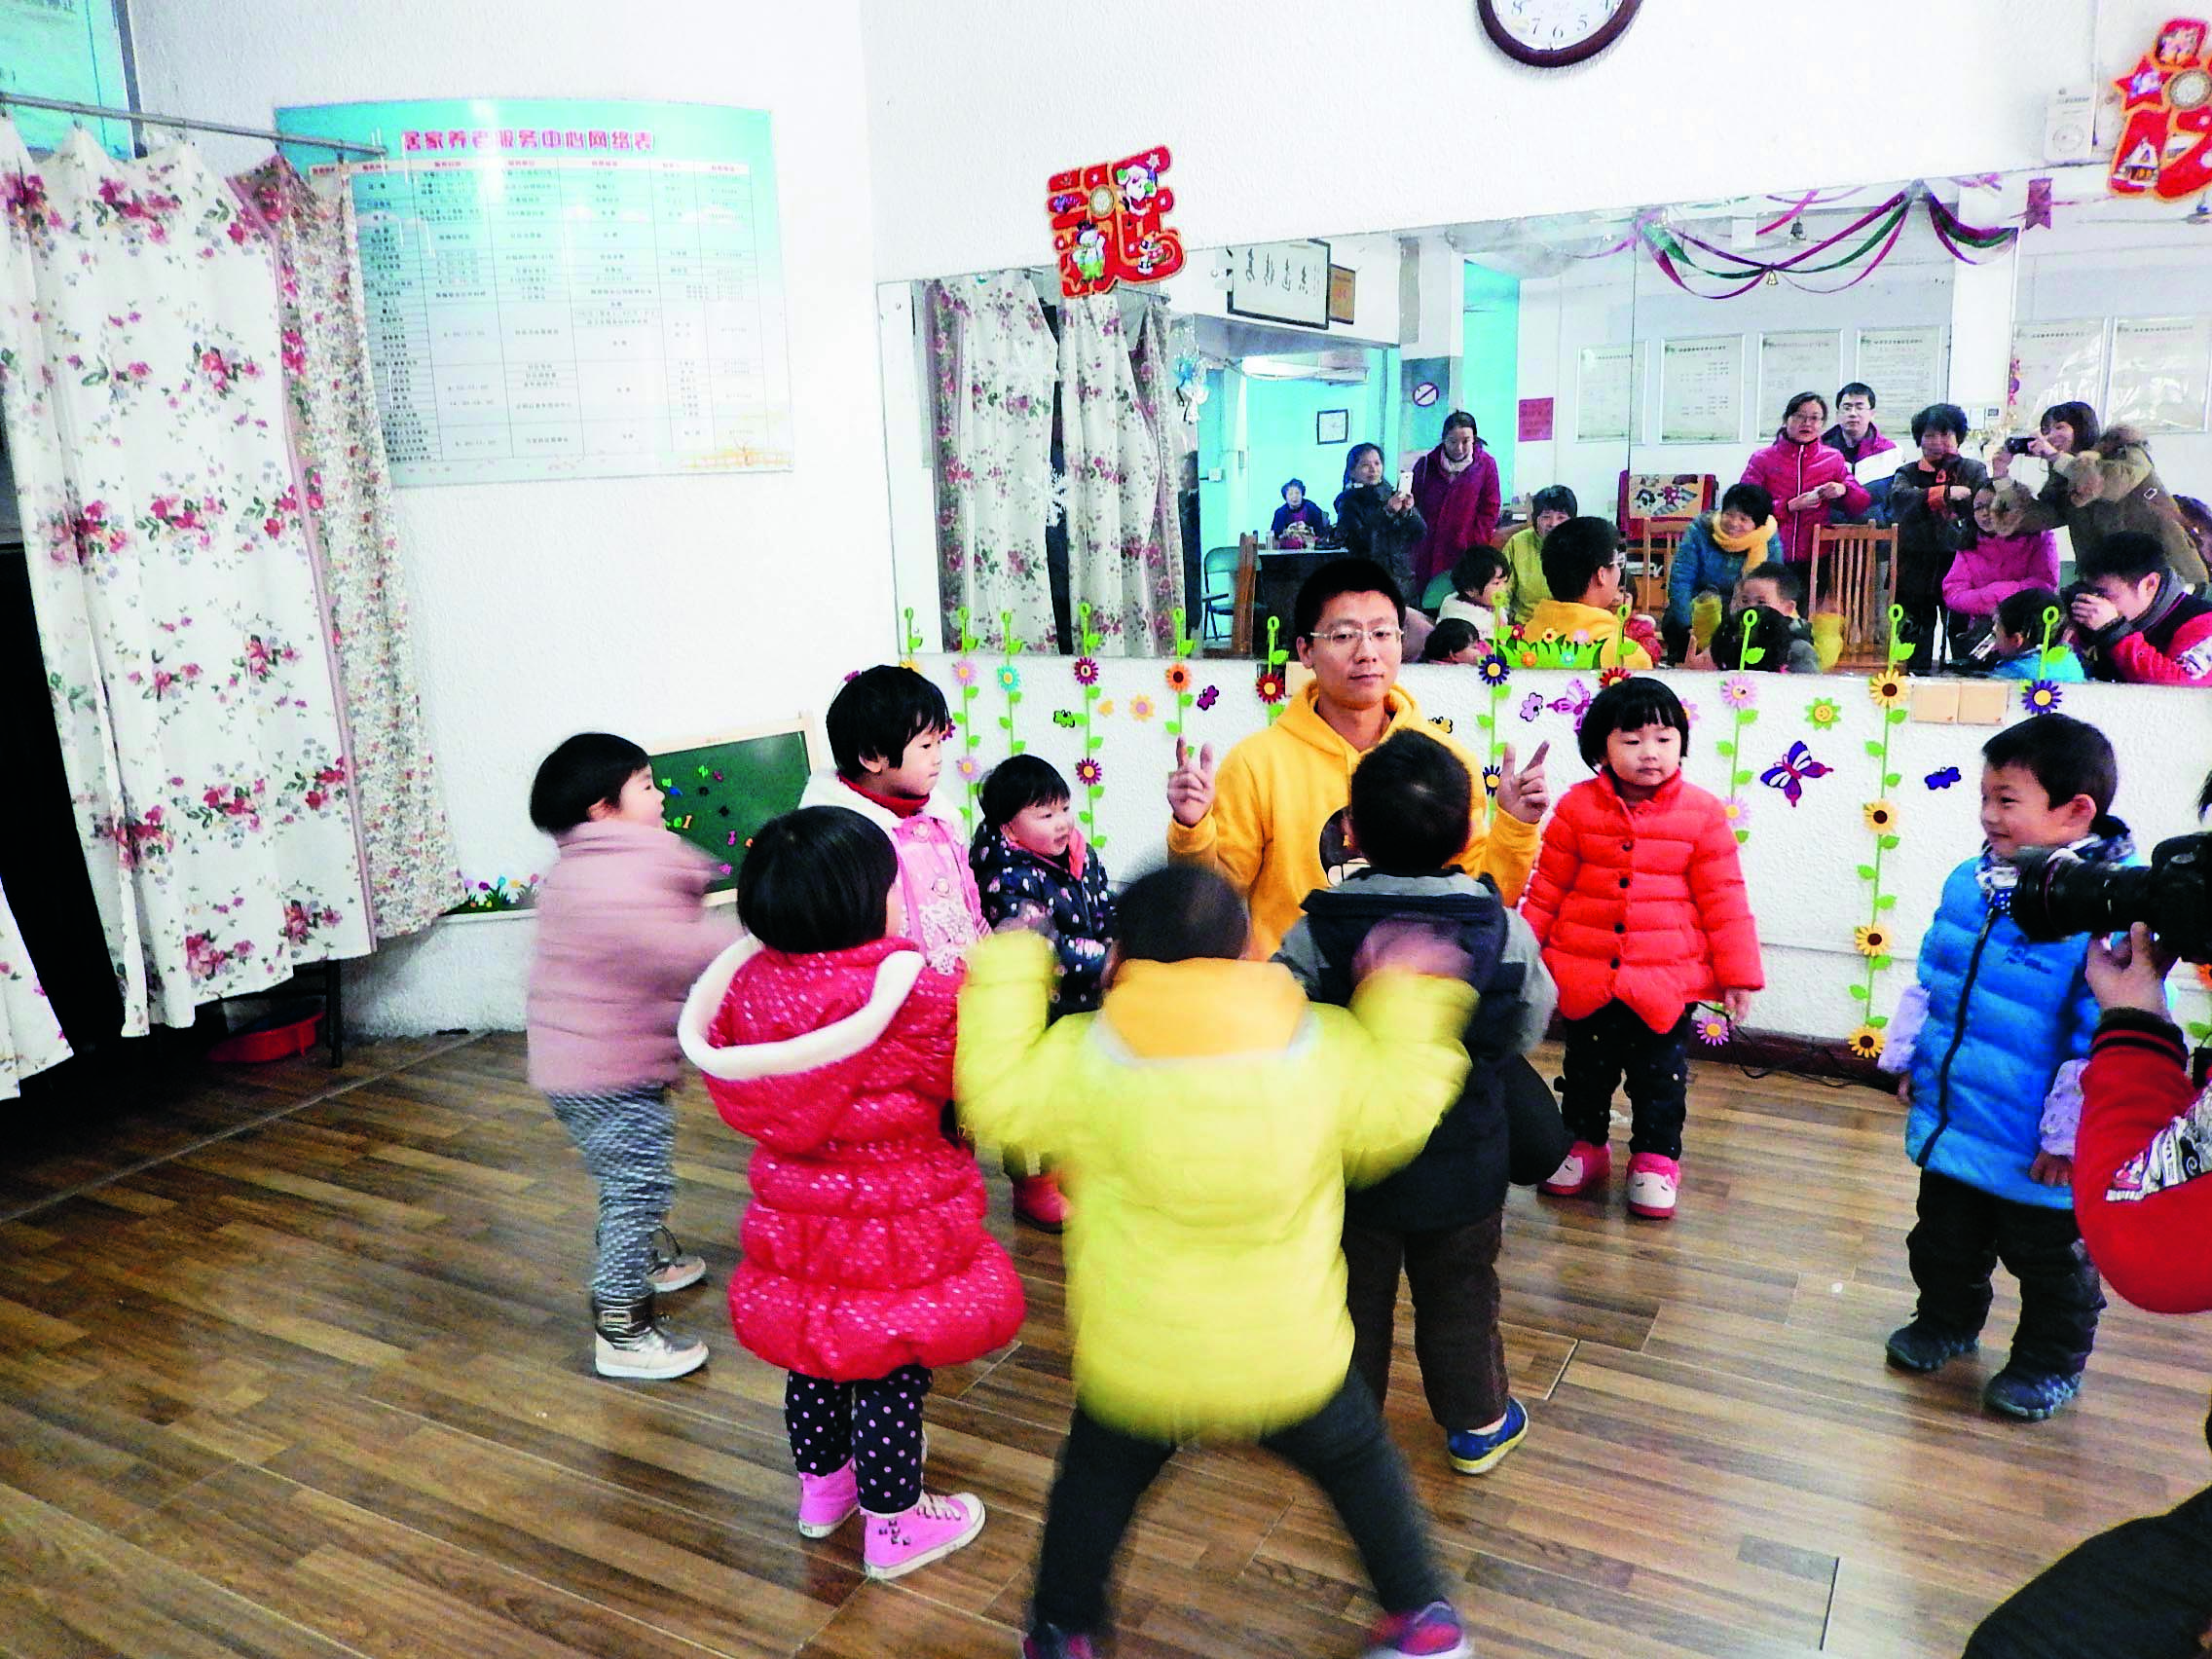 Couple Establishes Workshop to Develop Early Childhood Education in Community